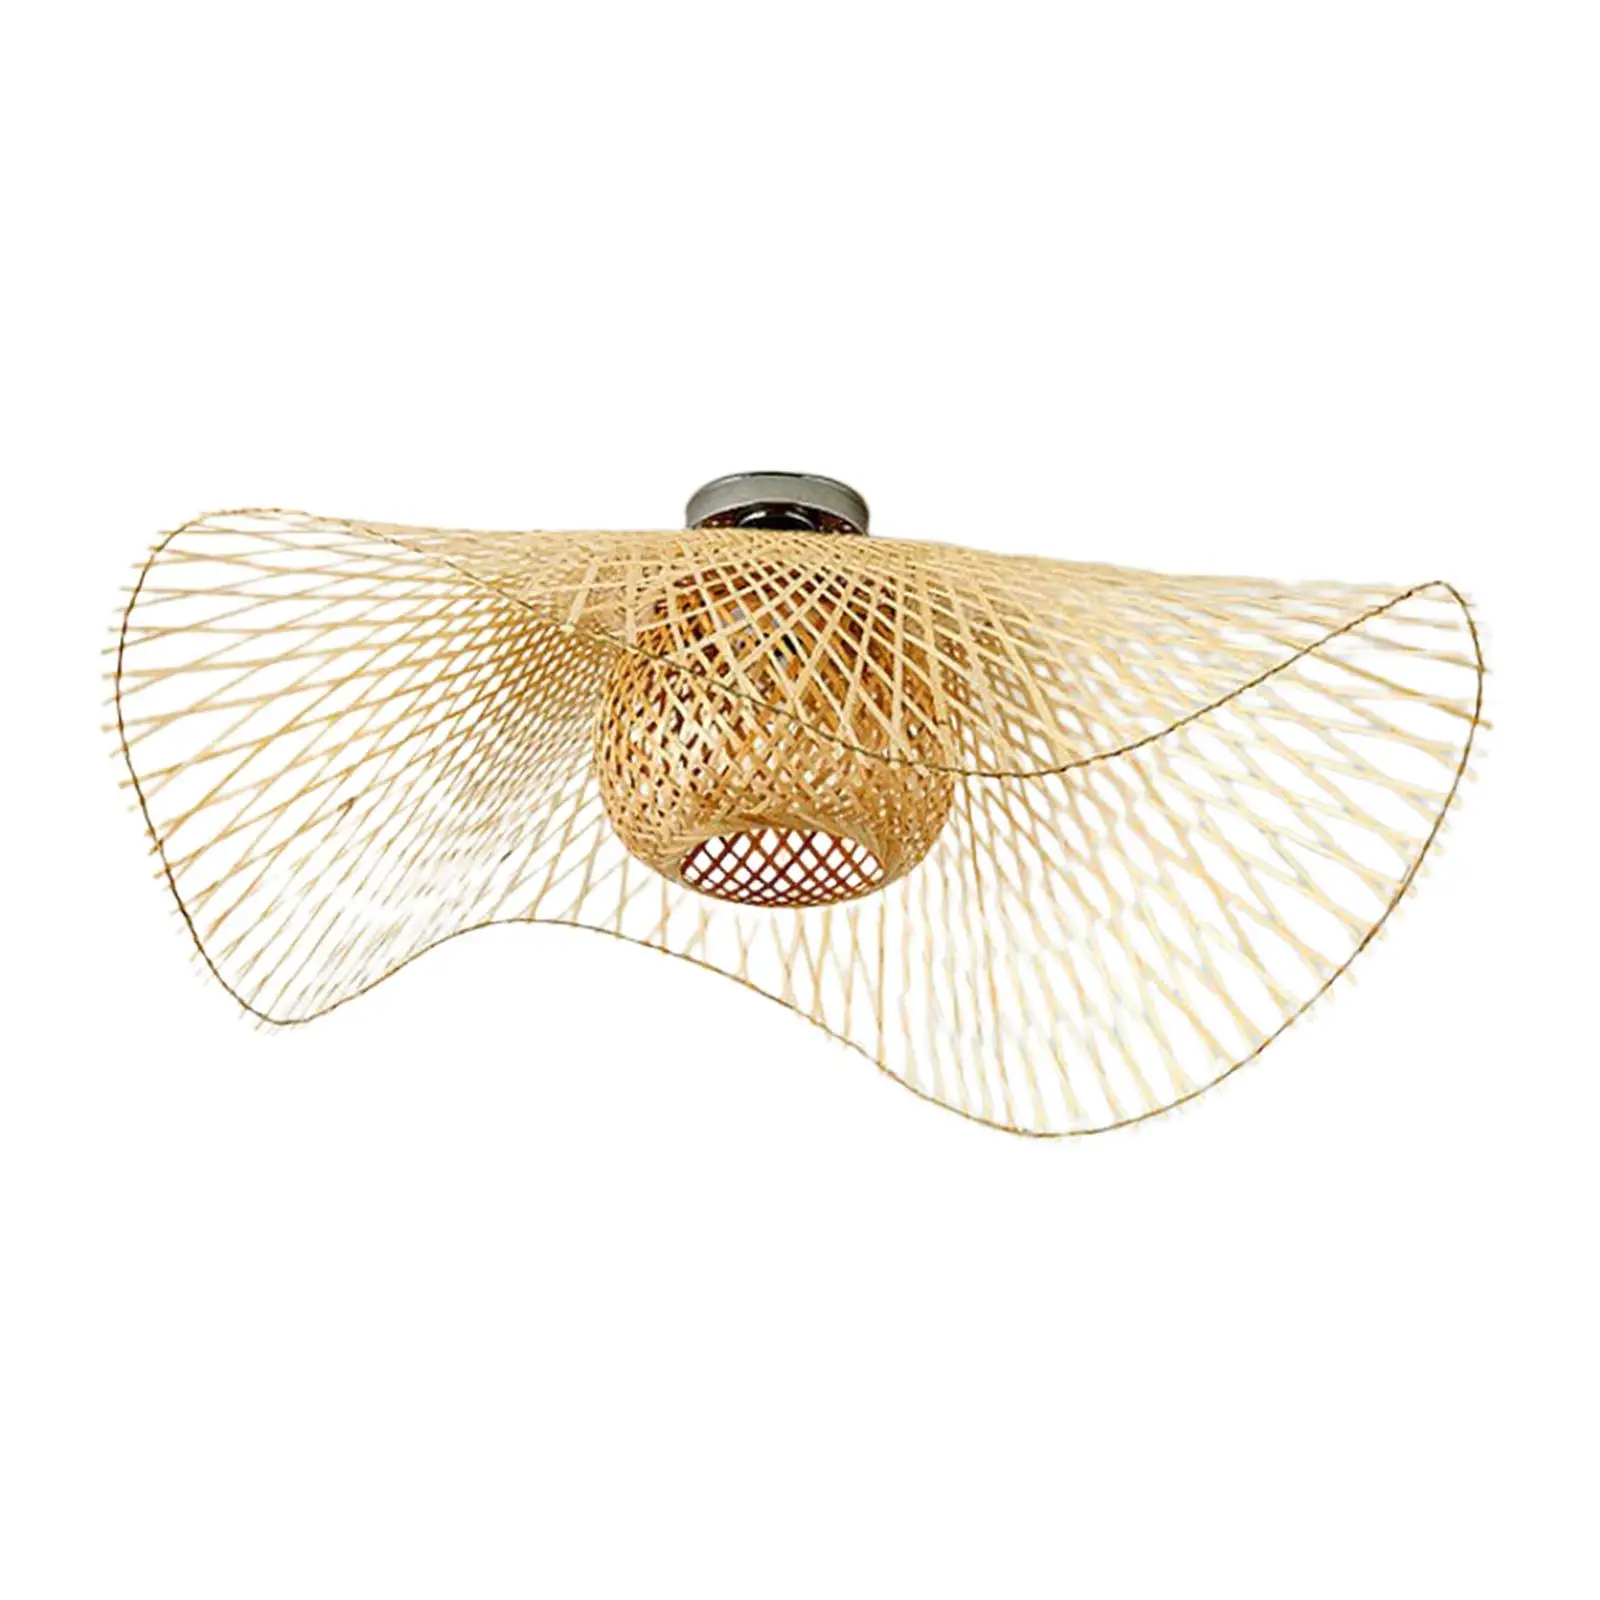 Bamboo Woven Ceiling Light 14 inch Flush Mount -Bulb (Not Included Hand-Woven)